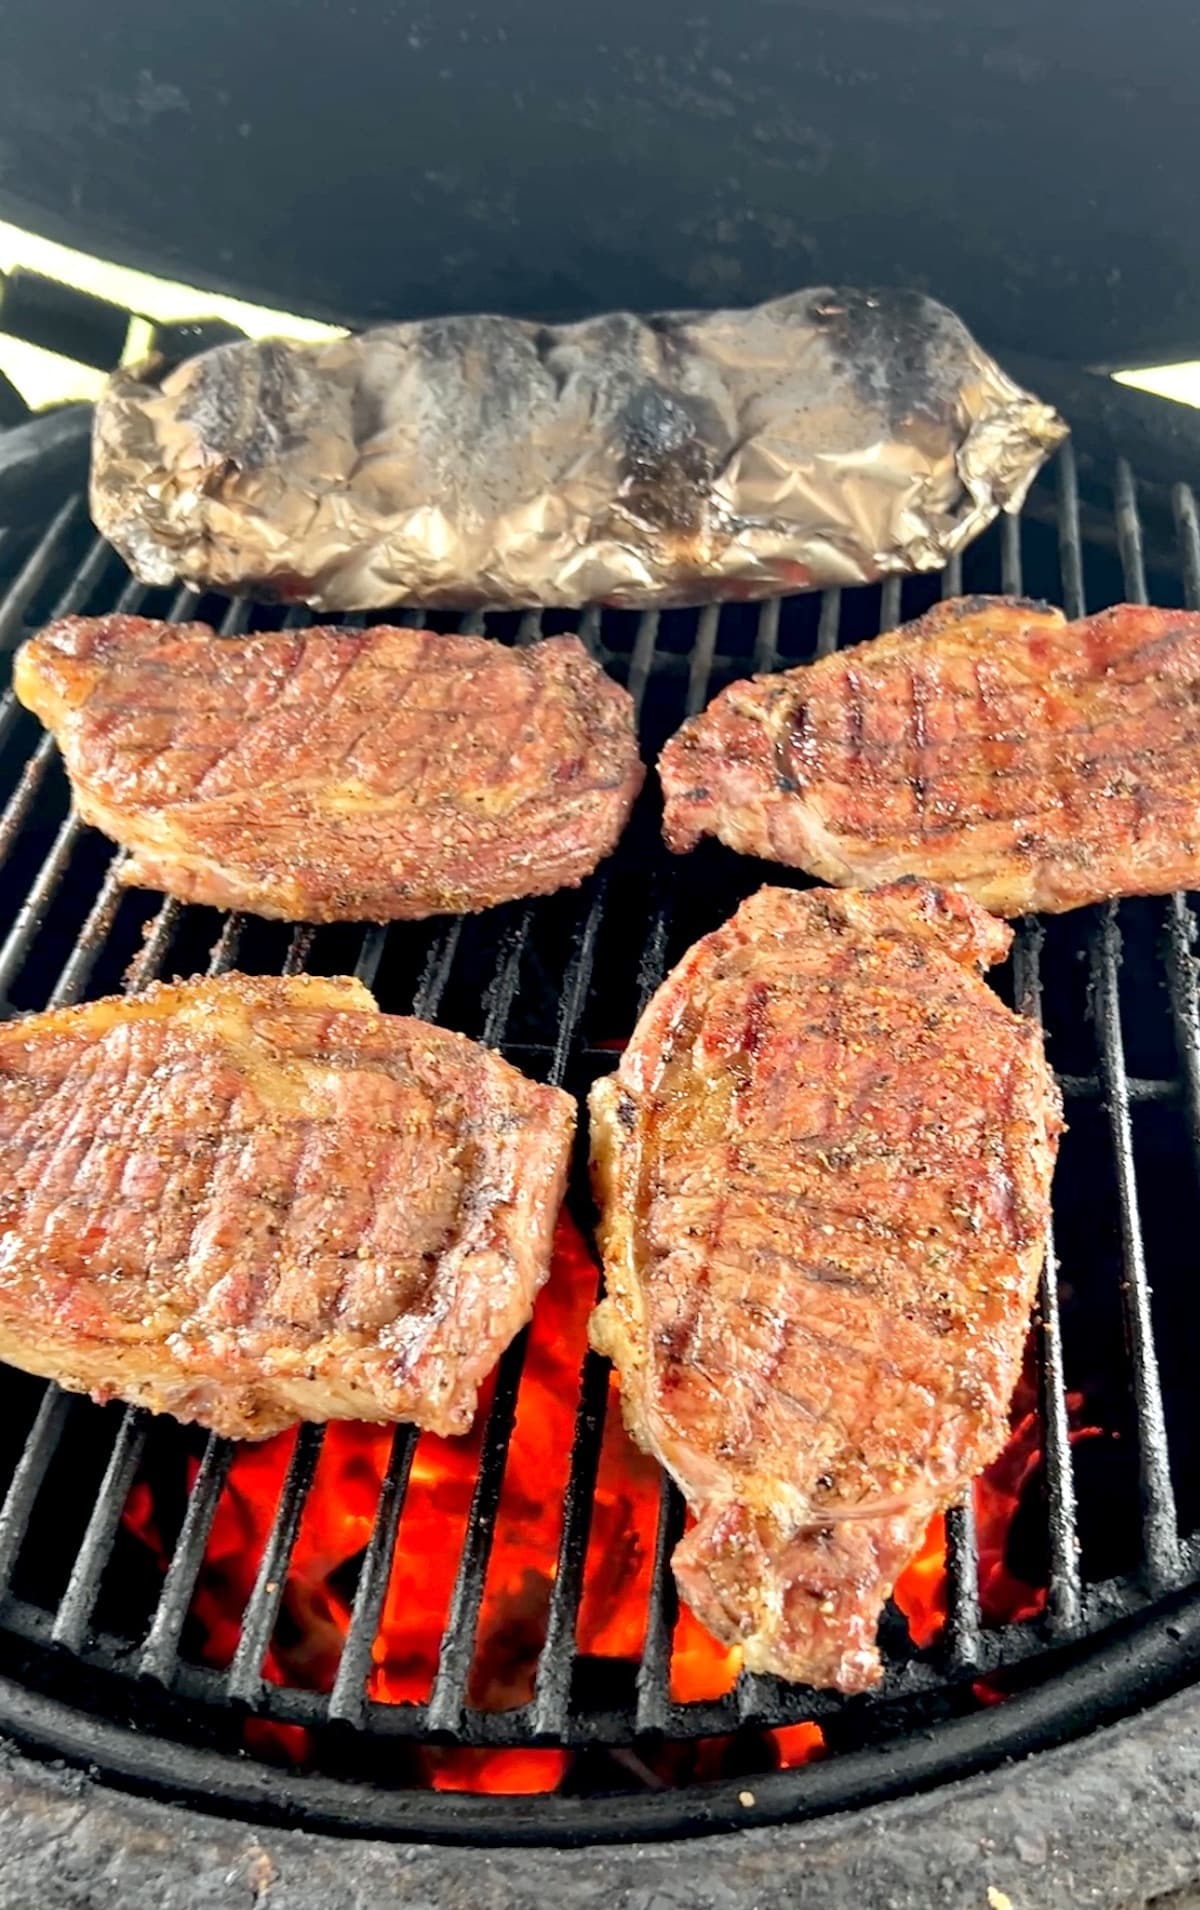 Grilling ribeye steaks with foil packet of potatoes.